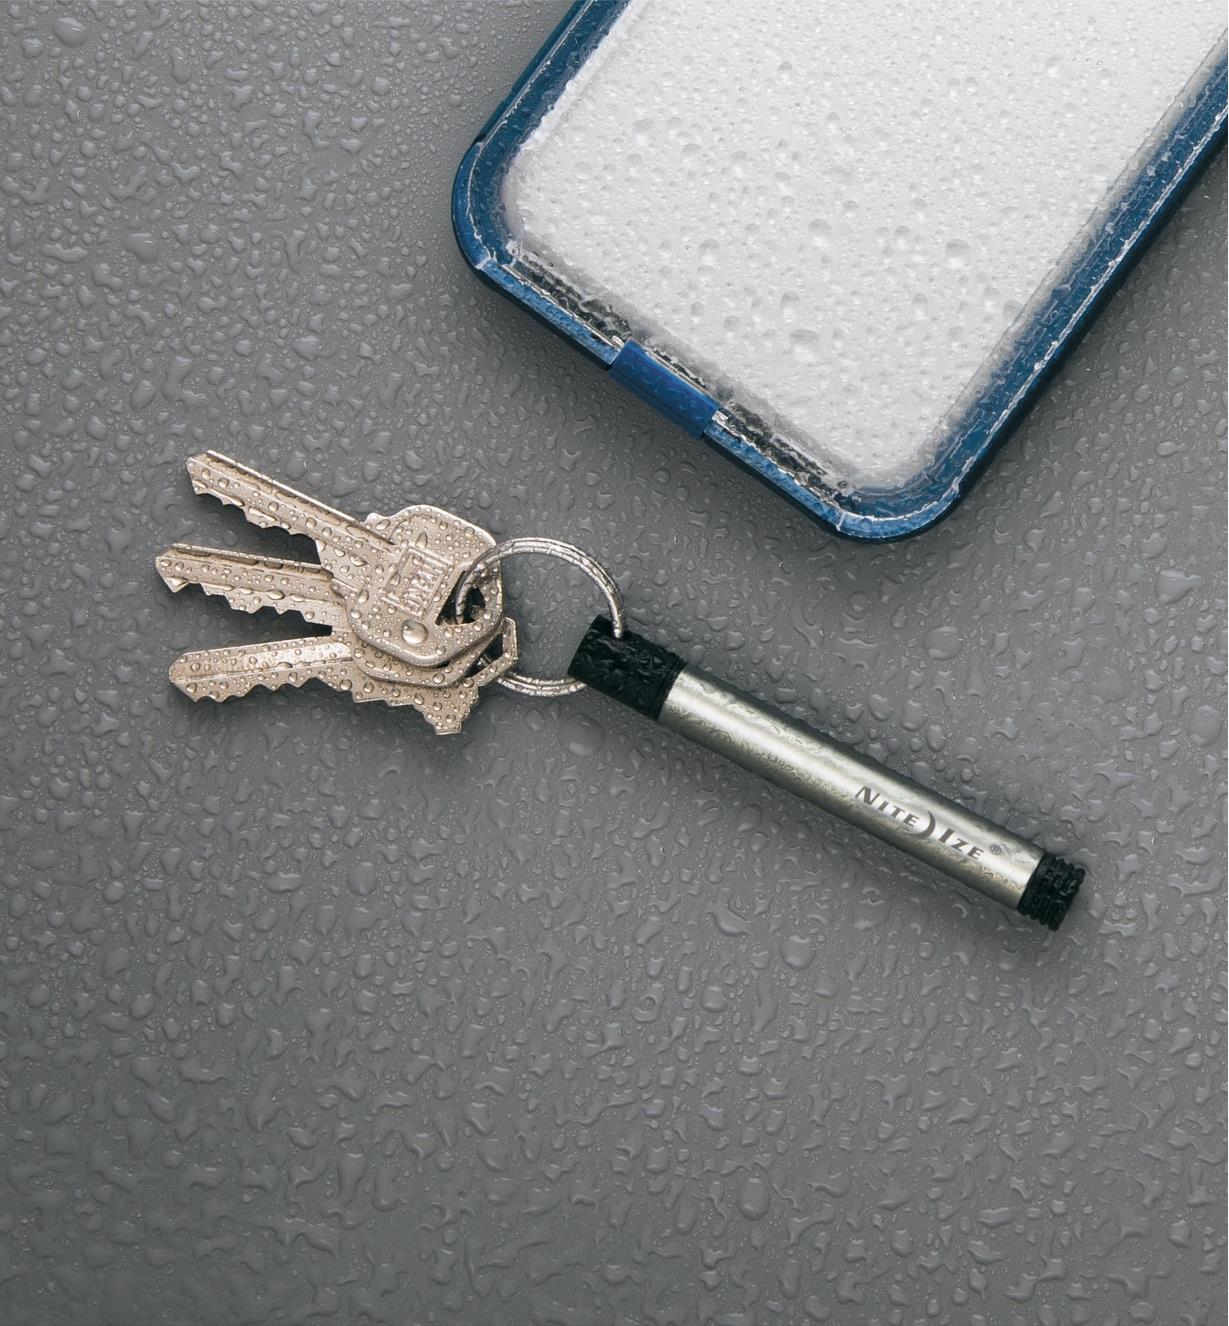 Inka Adventure Pen attached to set of keys and lying next to a cell phone, sprinkled with water